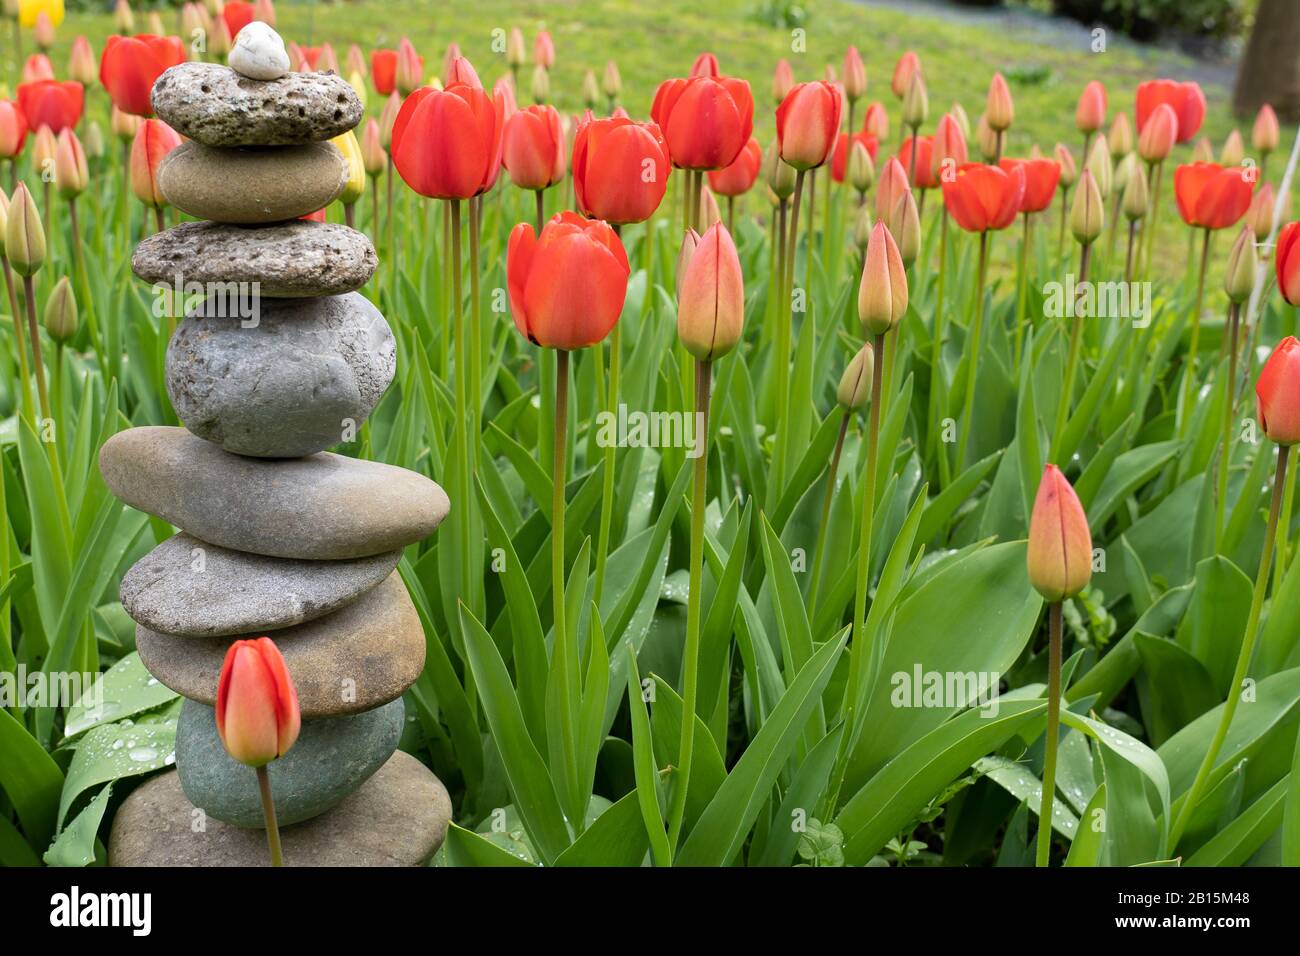 Man-made stone mounds in a field of red and yellow tulips in different life stage of blossoming. Original small type of tulips in private garden, Swit Stock Photo